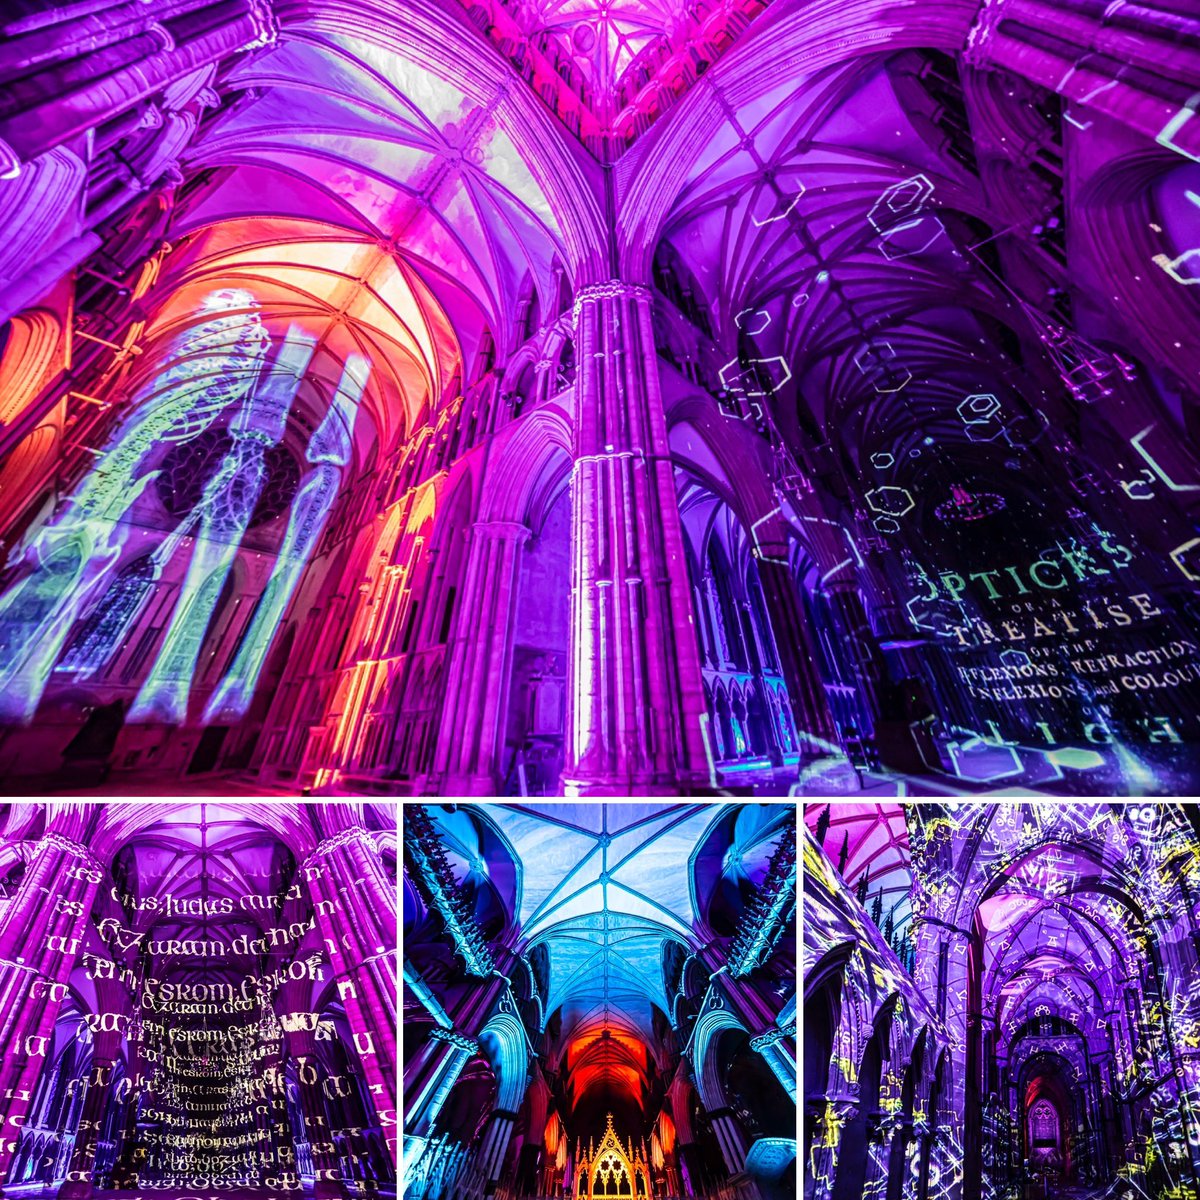 Another fantastic week in @LincsCathedral bringing “art on an epic scale” to the #architecture of the #cathedral with #science - the #fineart #immersive #sonetlumiere #illuminates nearly every inch of the interior with #lightandsound